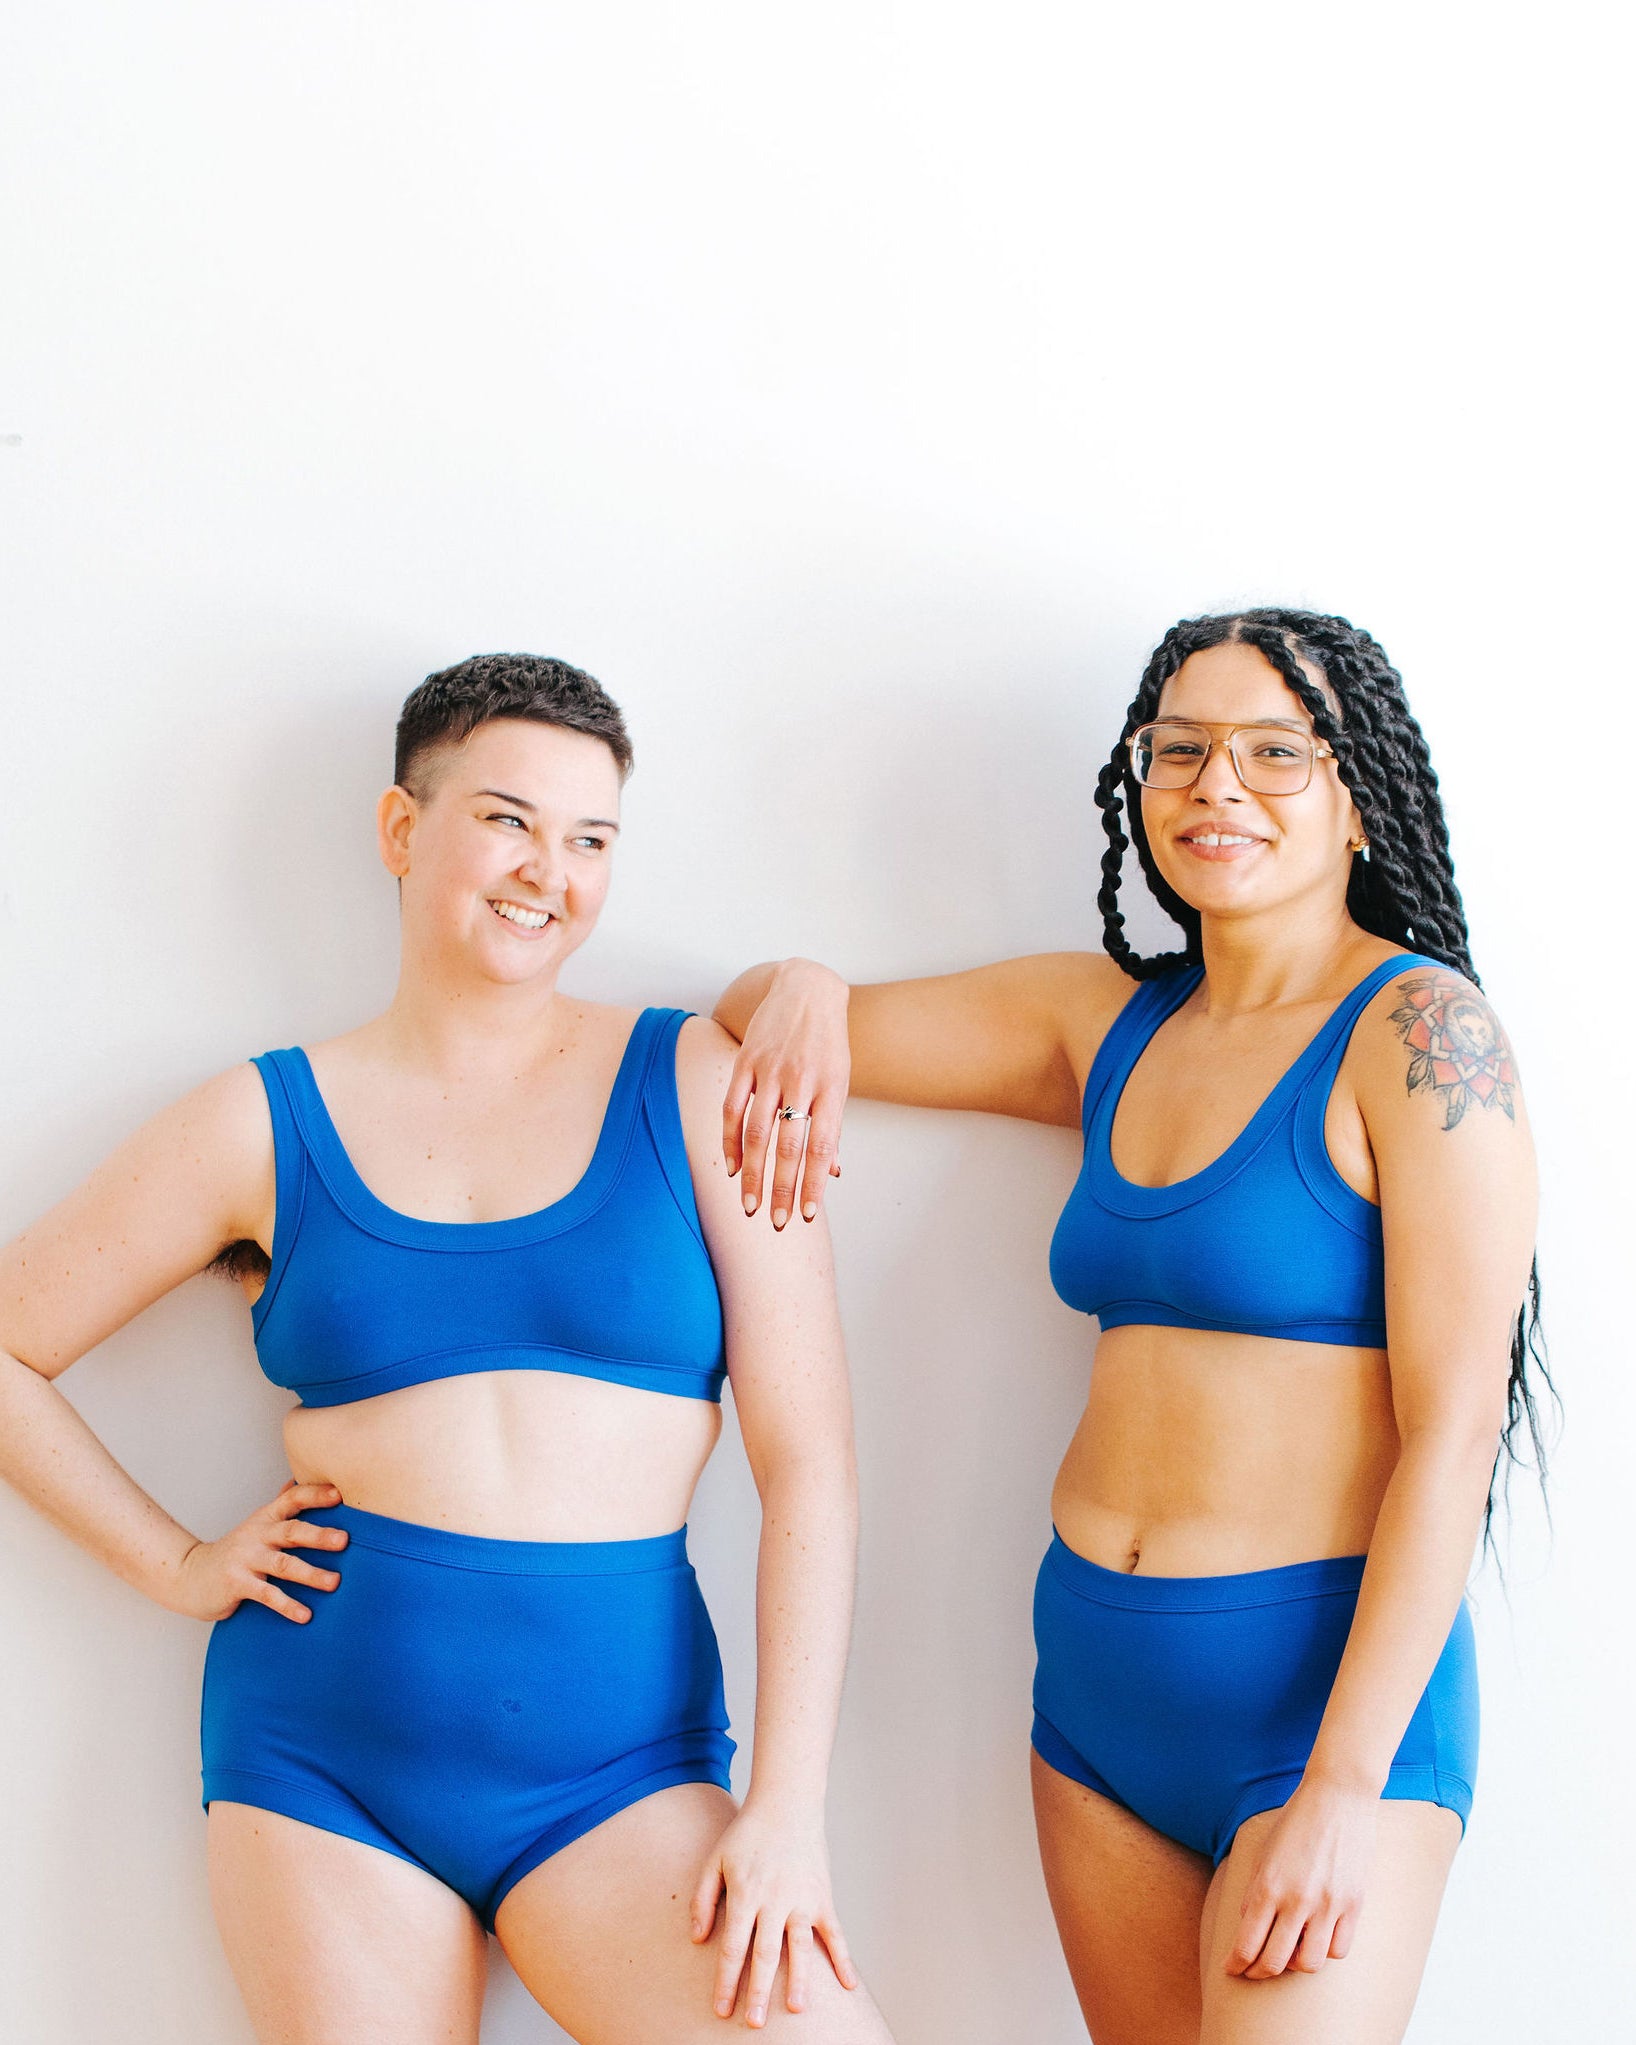 Two models smiling together wearing Thunderpants Bralette and underwear sets in Blueberry Blue.